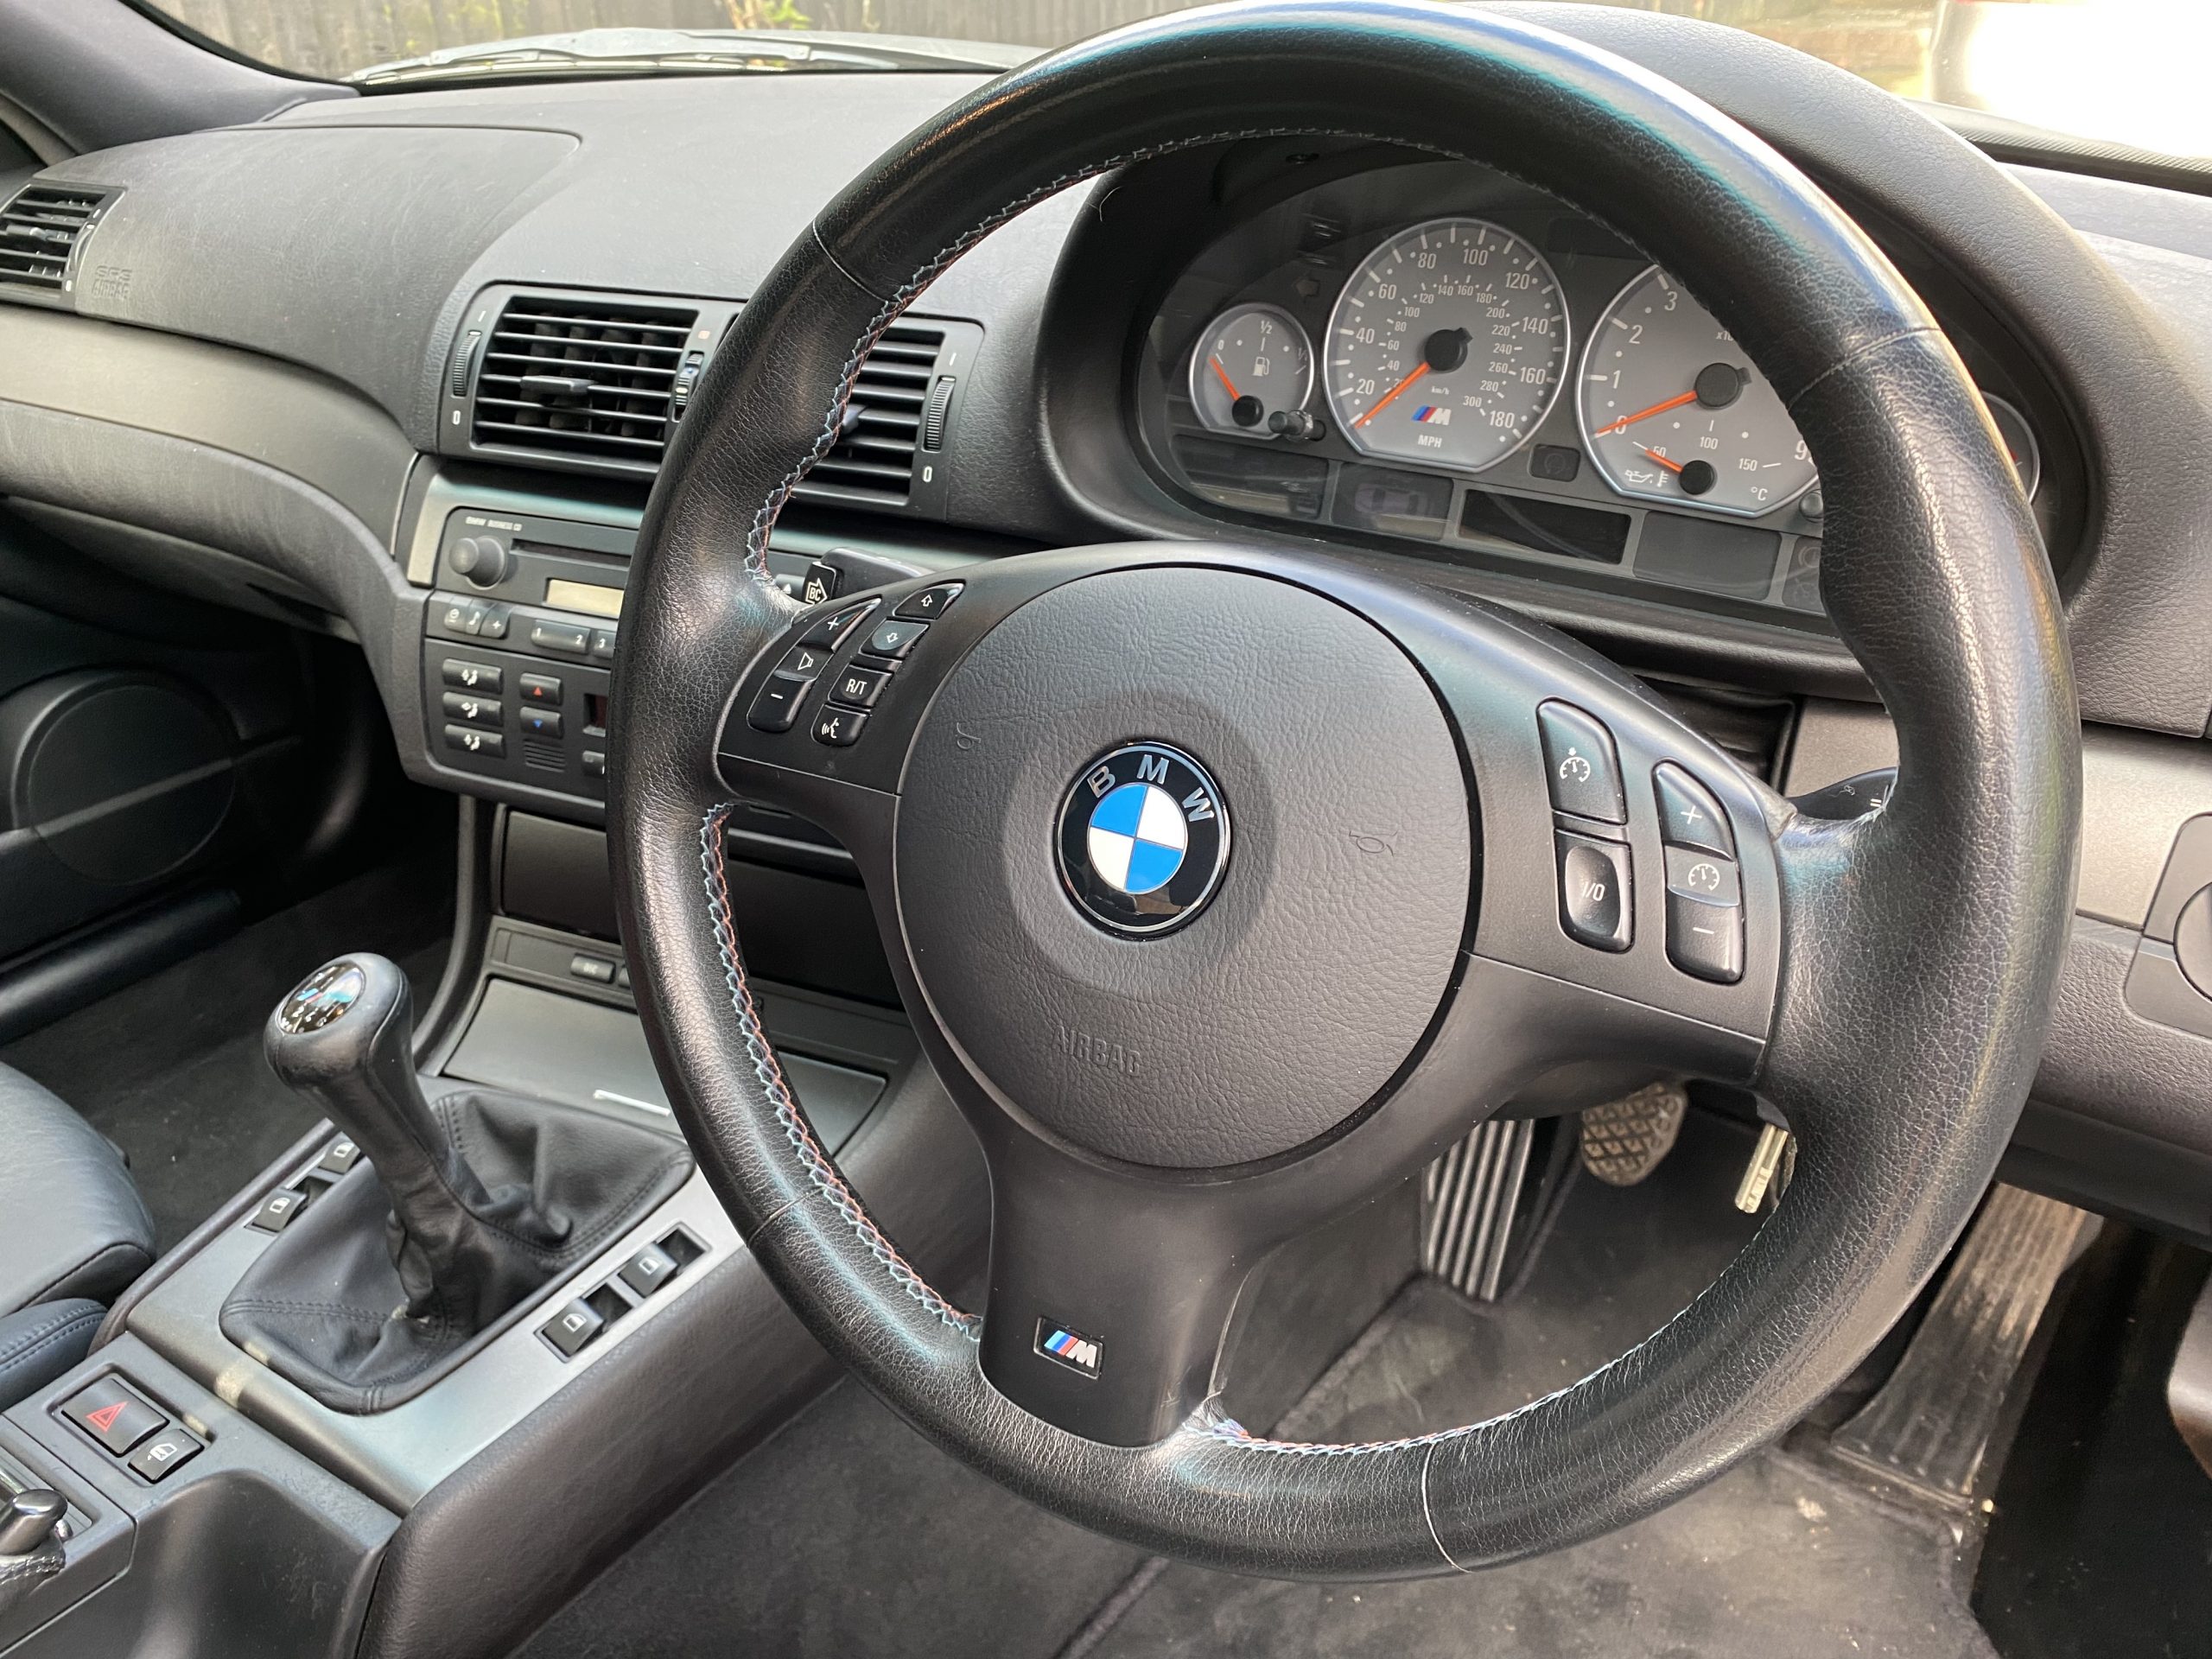 Takata airbag from a 2003 BMW is changed during safety recall